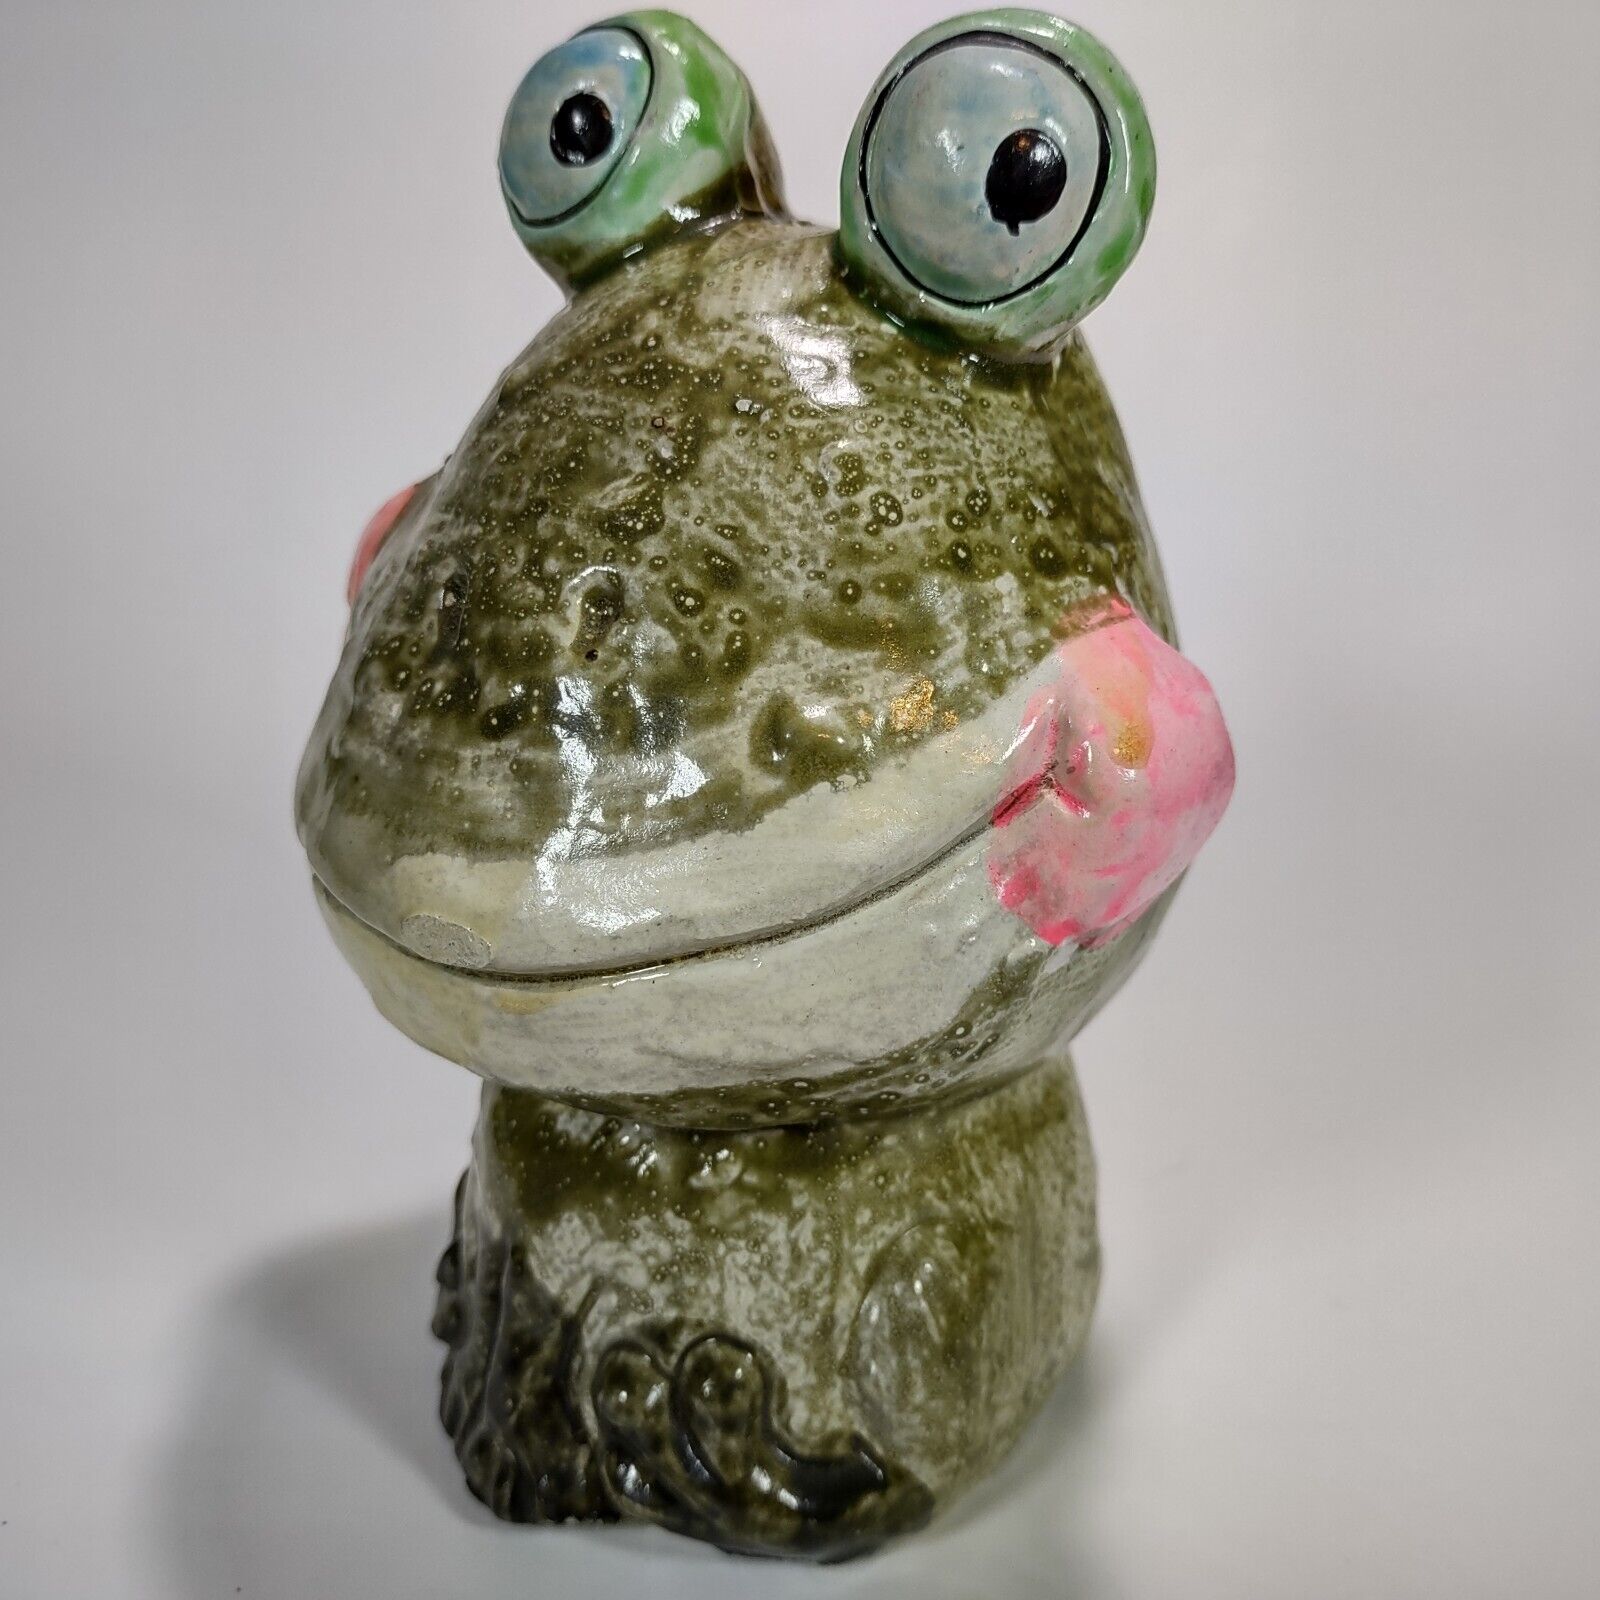 Vintage Derpy Smiling Frog Ceramic Coin Bank Hand Painted Made In Taiwan 5.5\